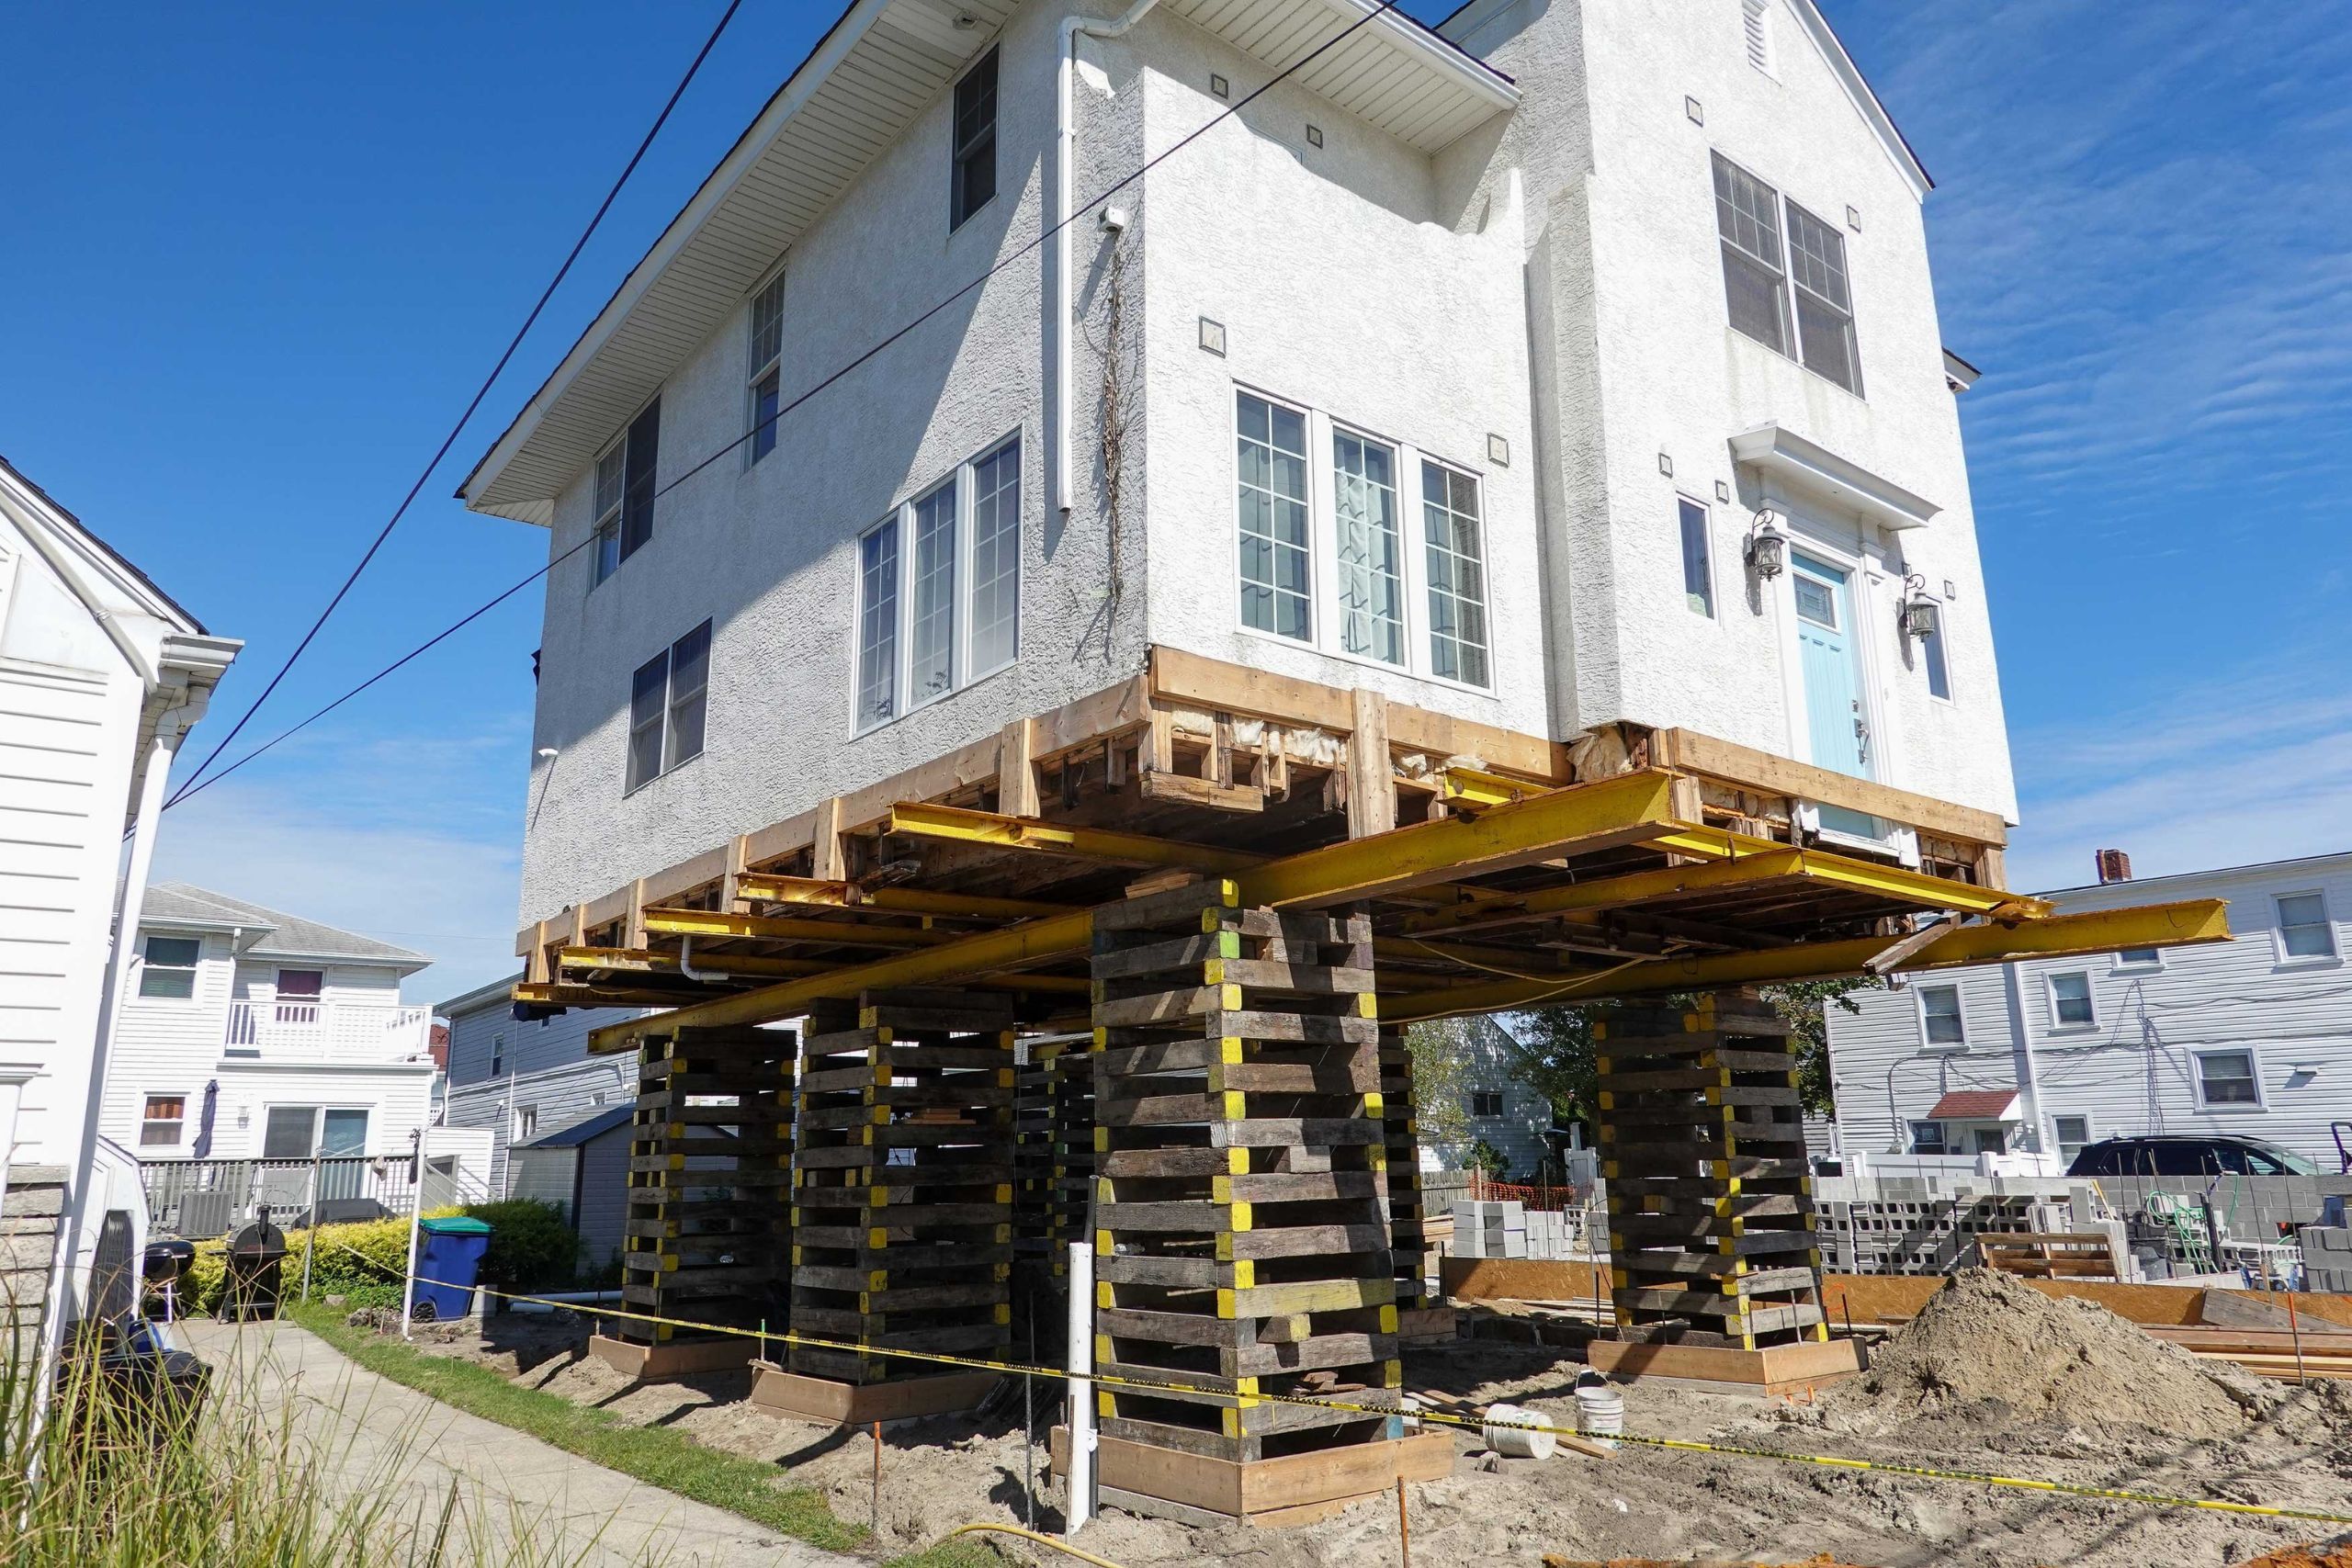 A team of professionals using specialized equipment to raise a house in Boston, preparing it for elevation and renovation